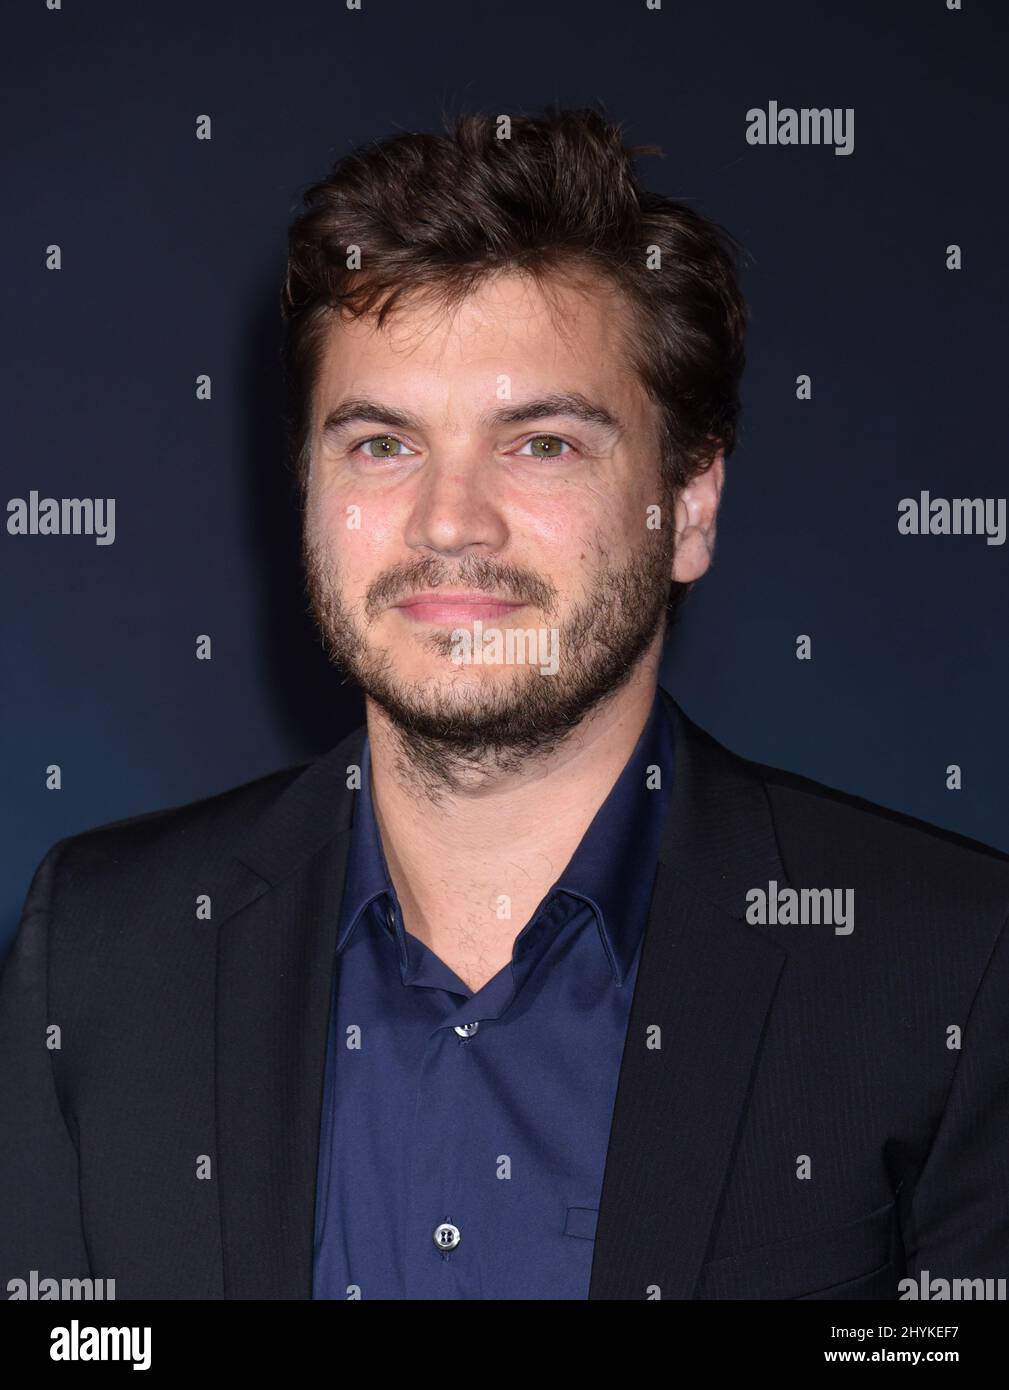 Emile Hirsch attending the 'Joker' Los Angeles Premiere held at the TCL Chinese Theatre Stock Photo